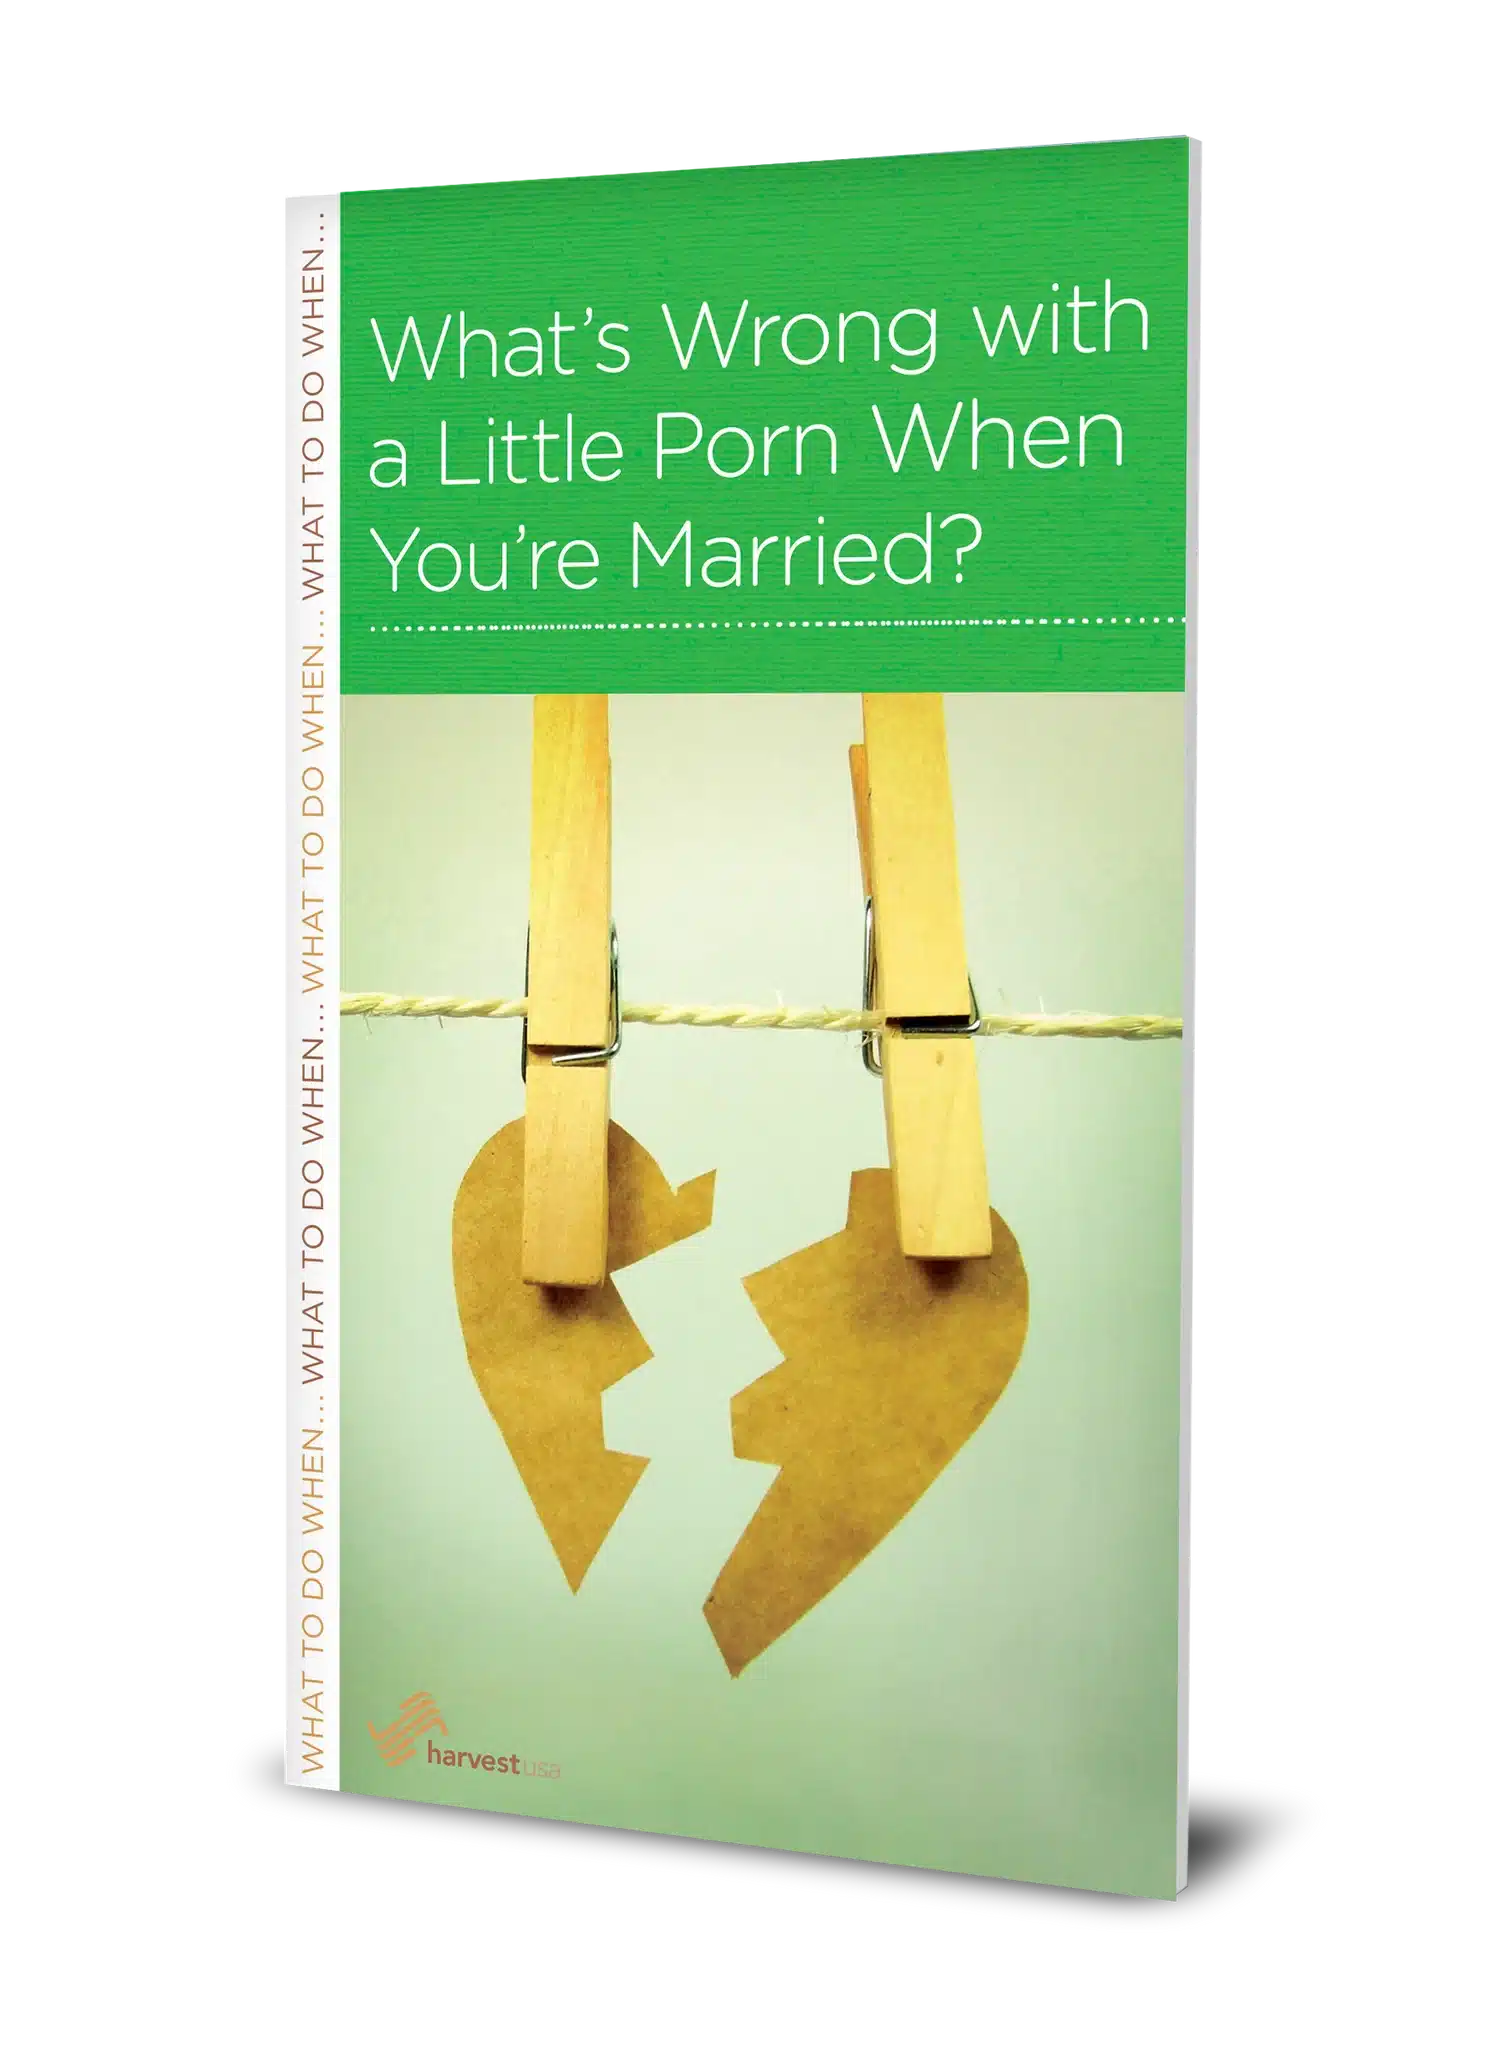 What’s Wrong with a Little Porn When You’re Married? (Minibook)